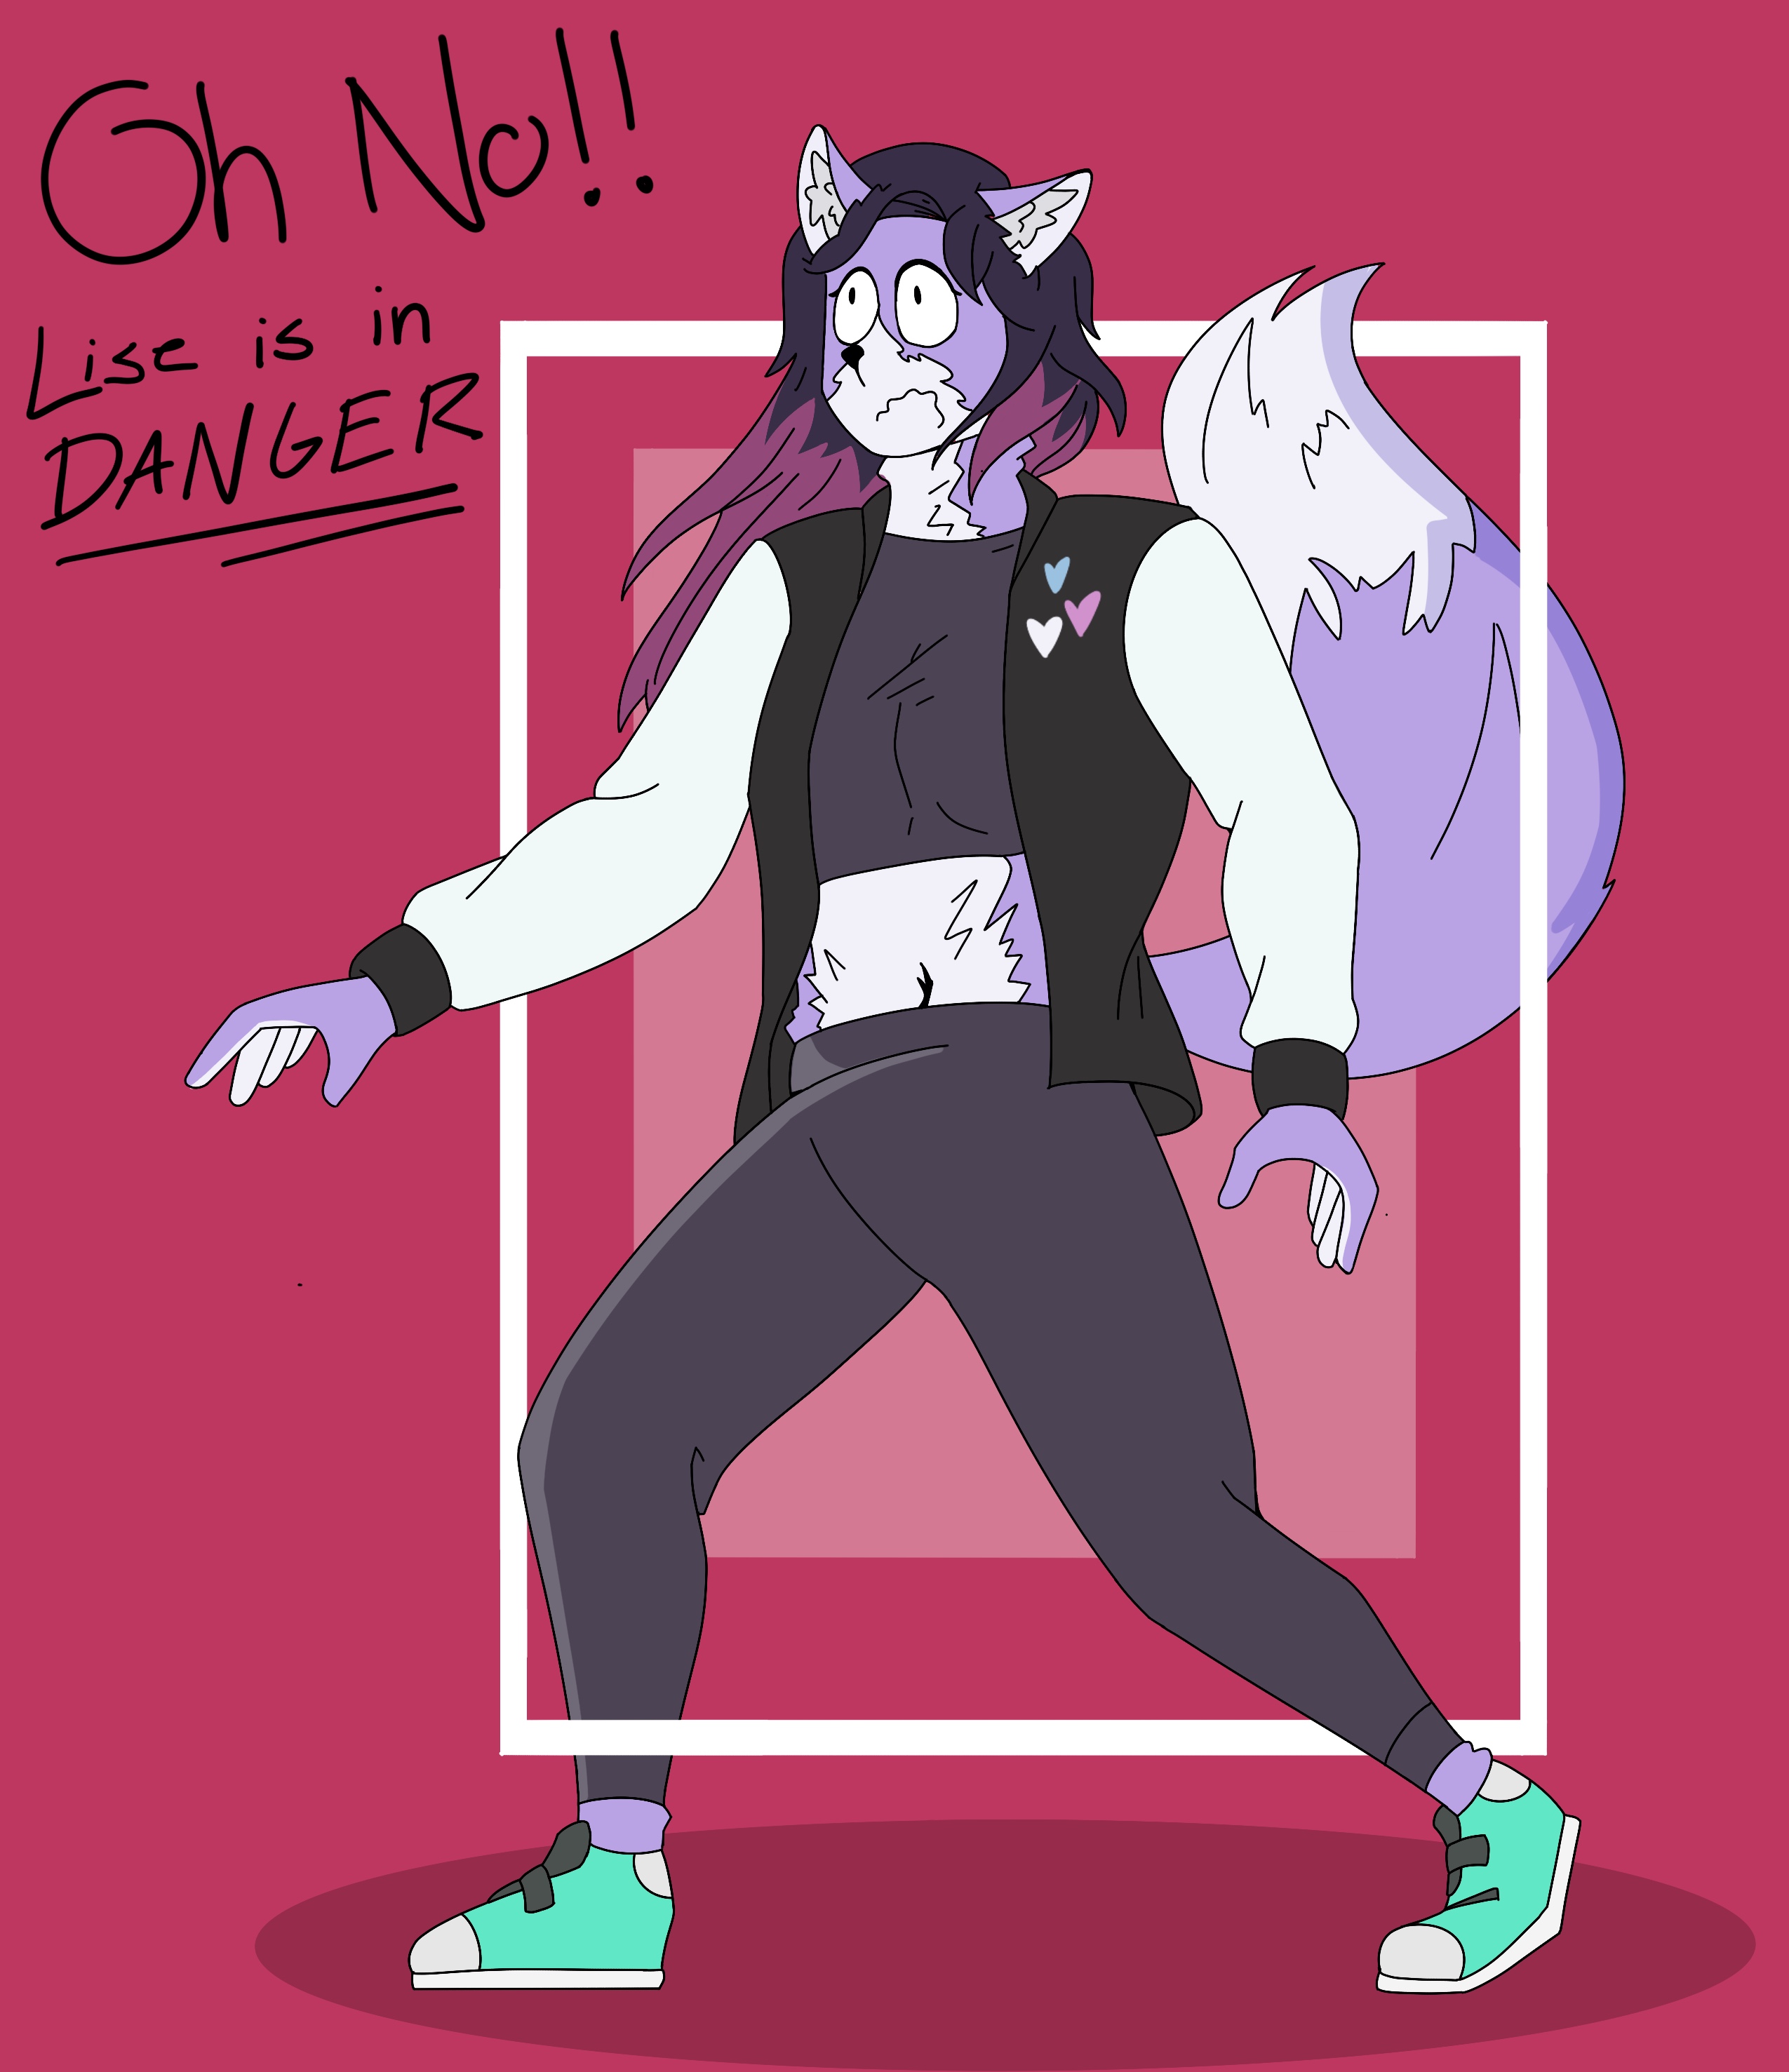 my fursona standing on a red background, paralyzed with fear, looking up at something. there is text in the top left corner saying 'Oh No!! Lise is in DANGER'